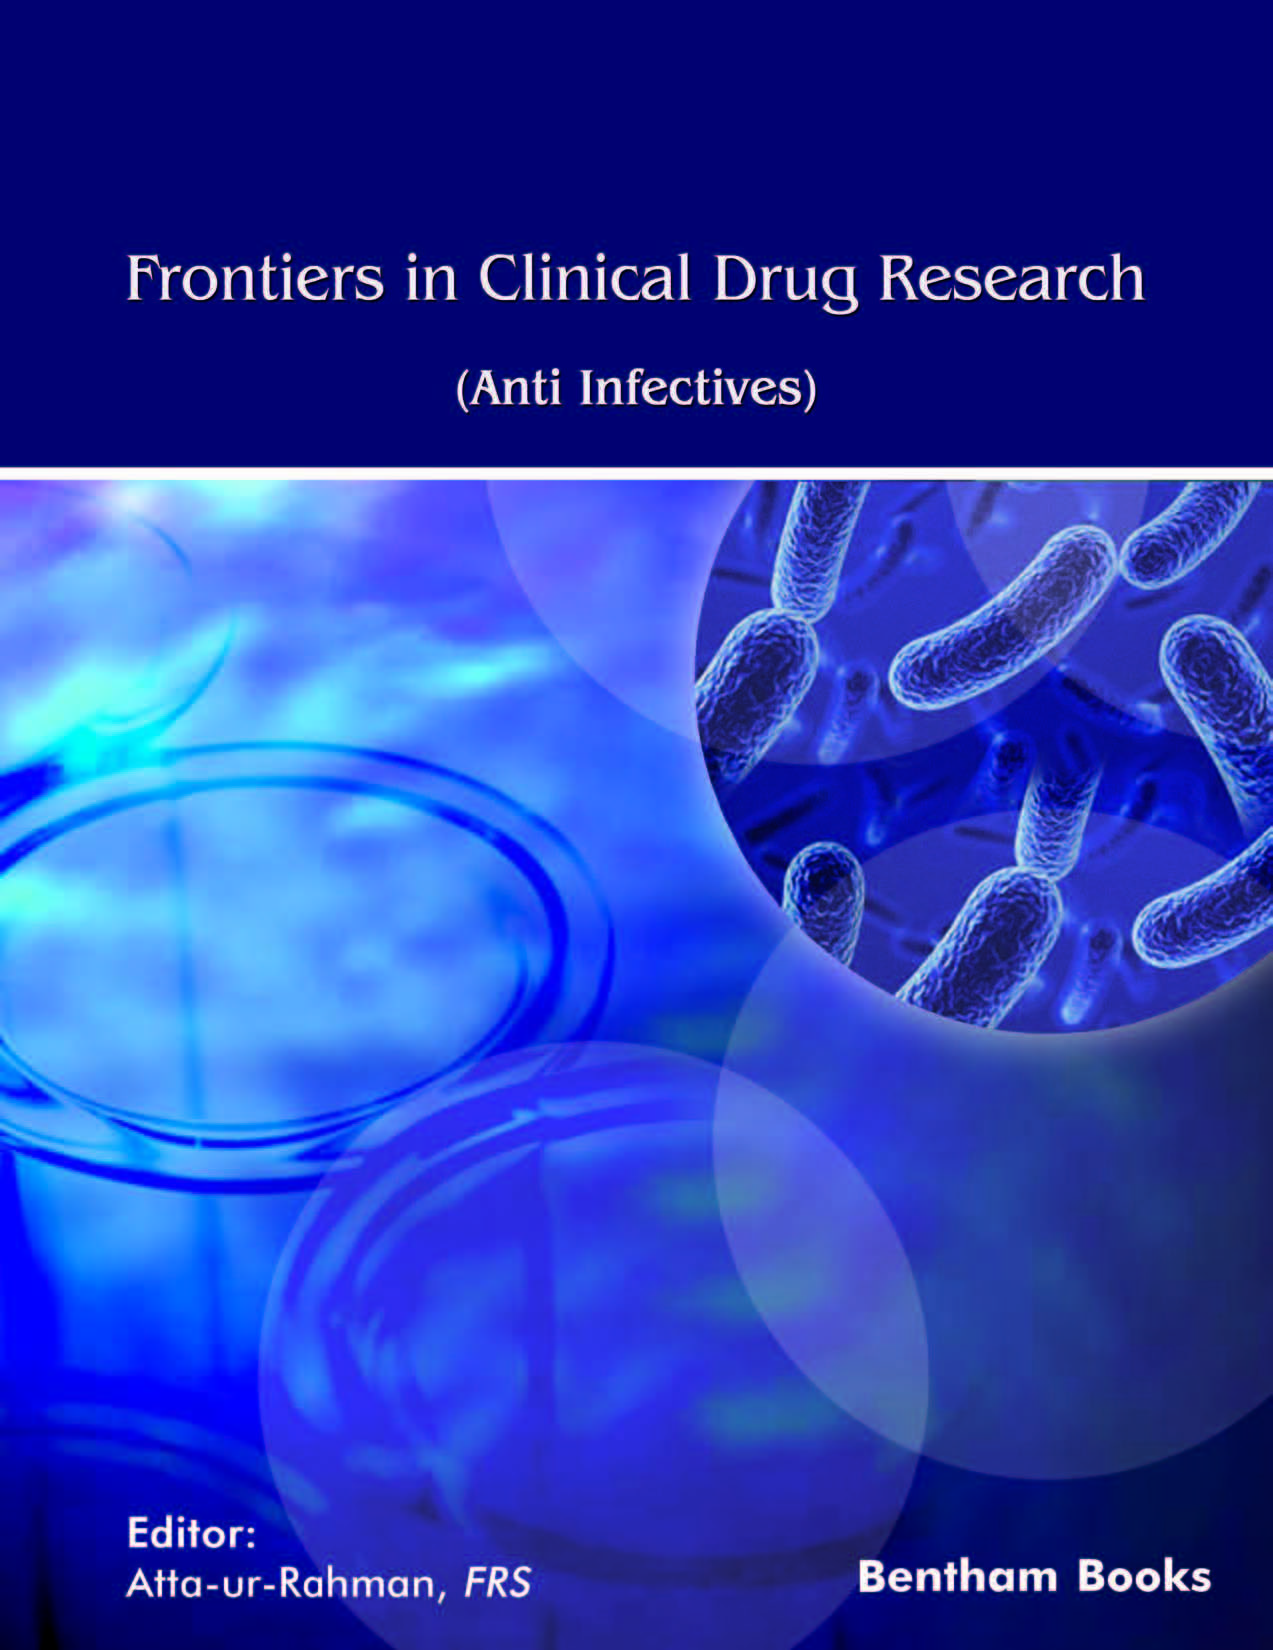 Frontiers in Clinical Drug Research-Anti-Infectives